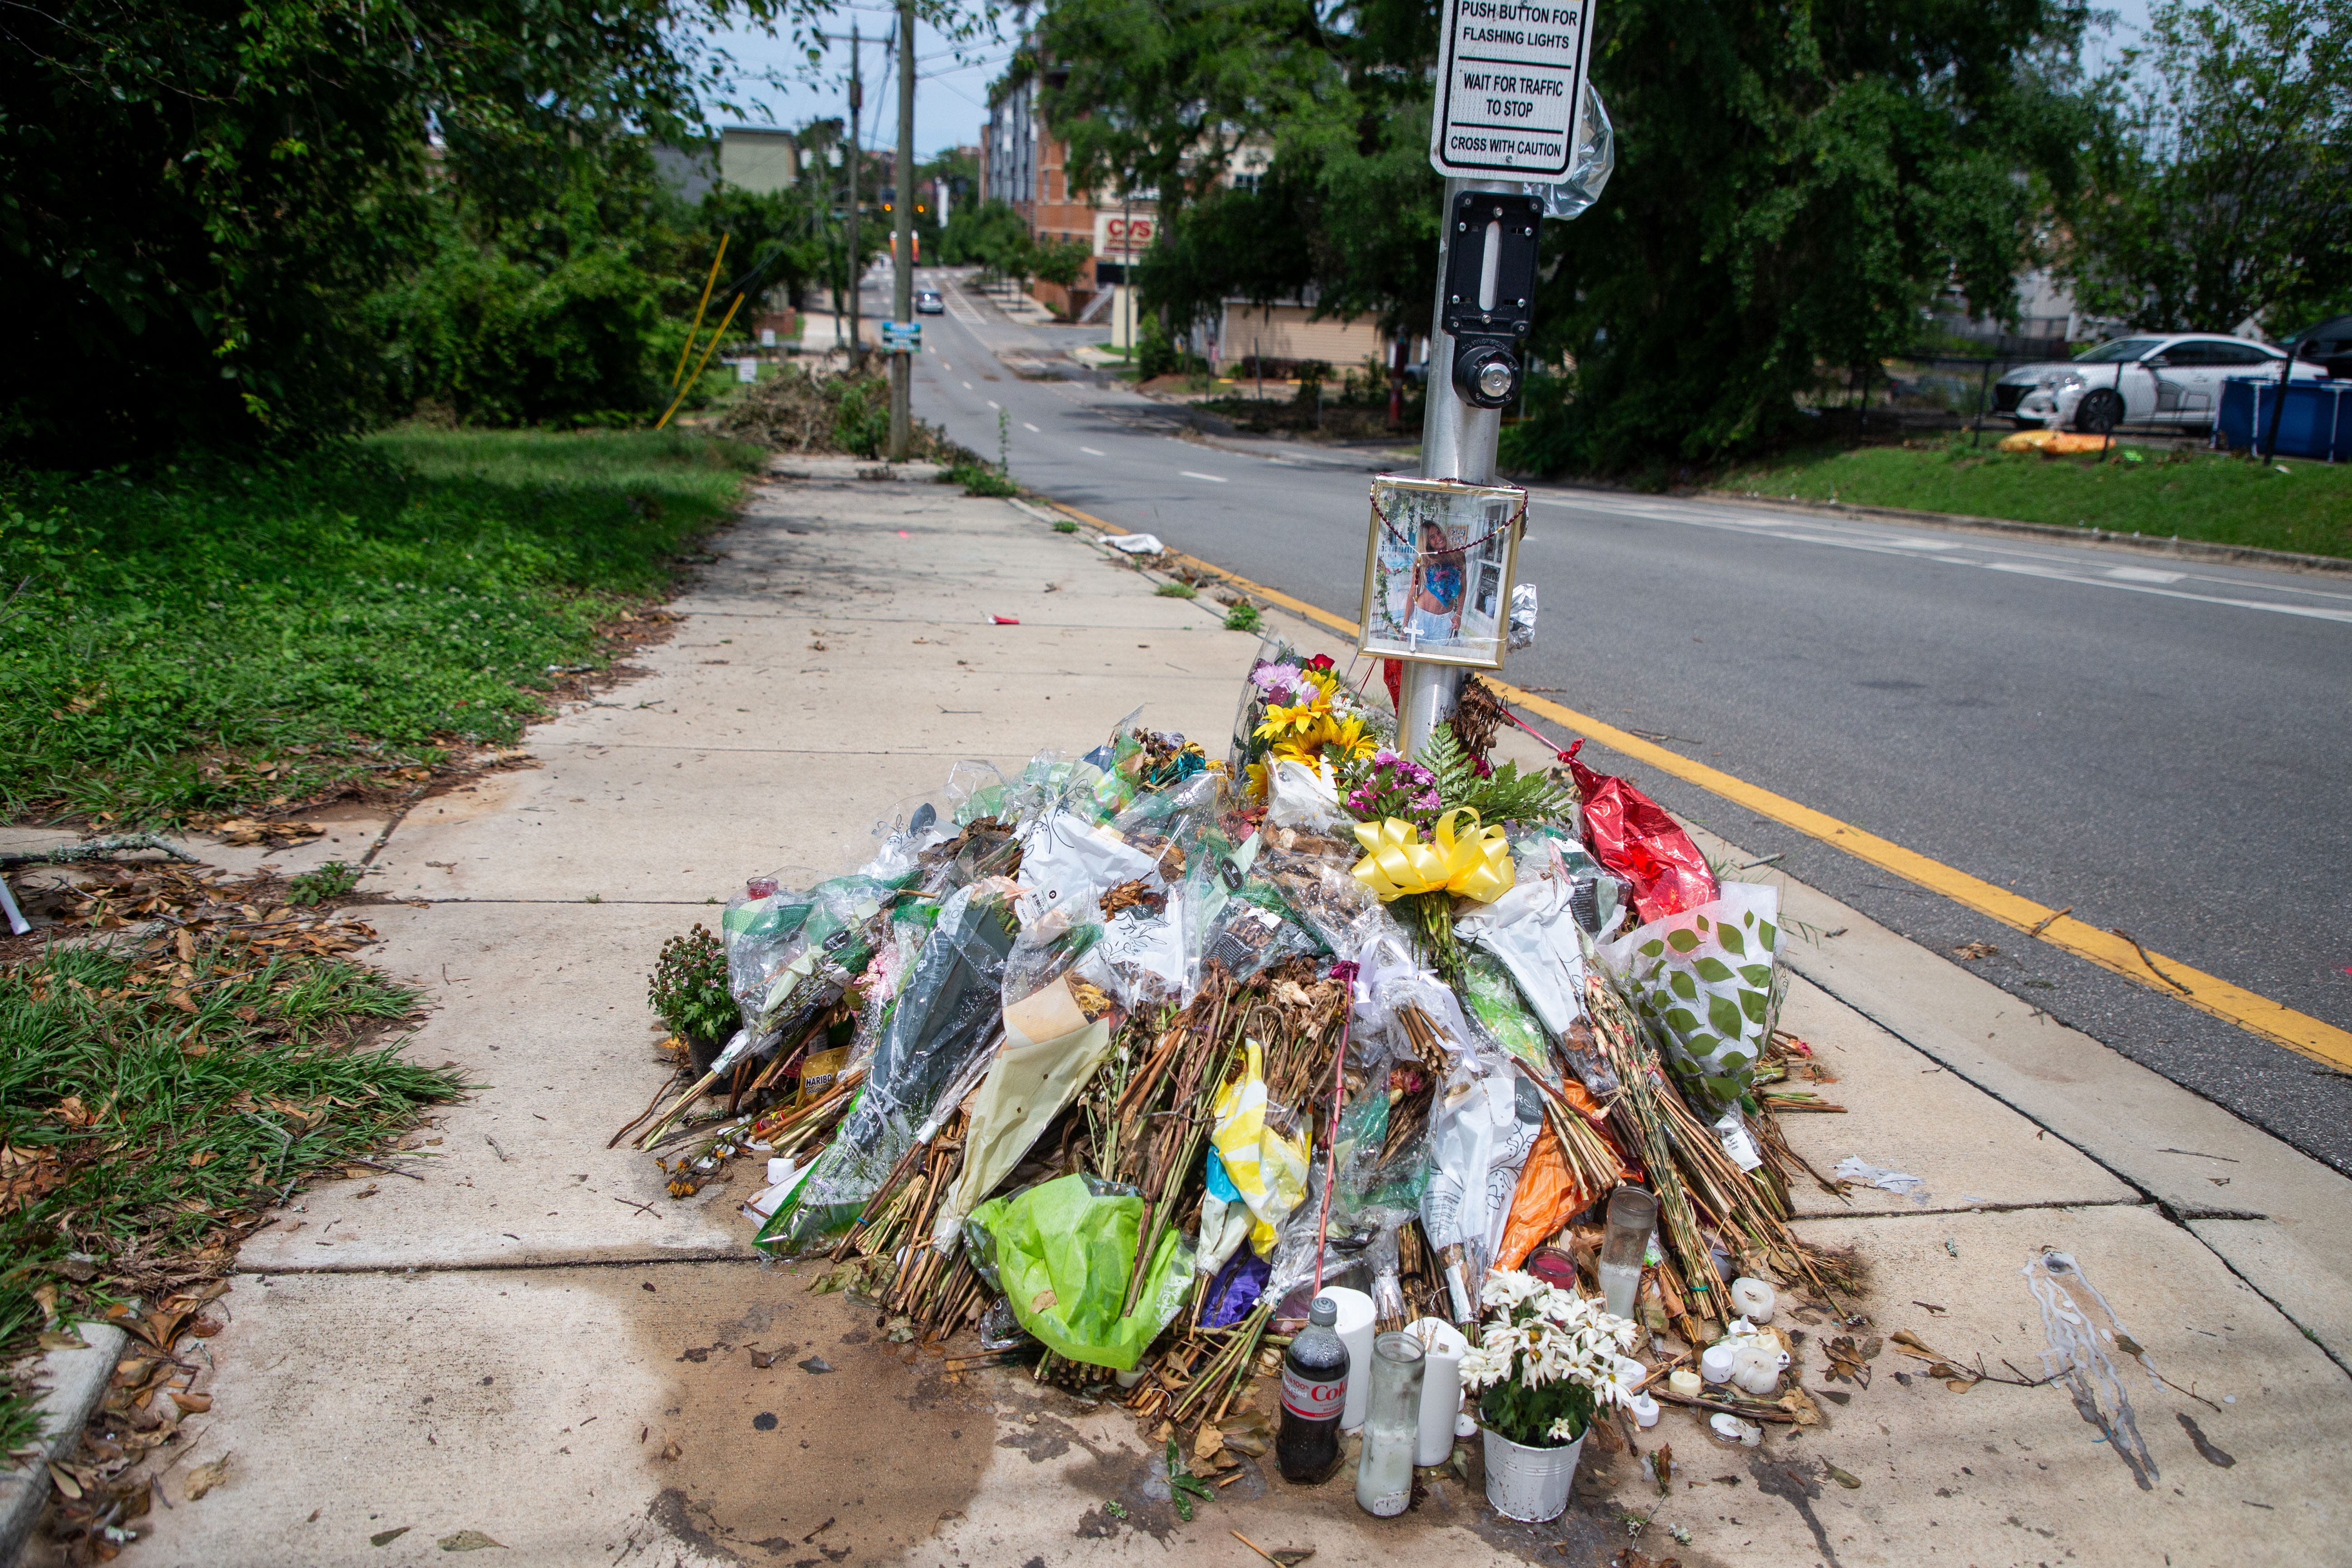 Curbside memorial for FSU student stands strong: 'That's our Ellie, stronger than a tornado'